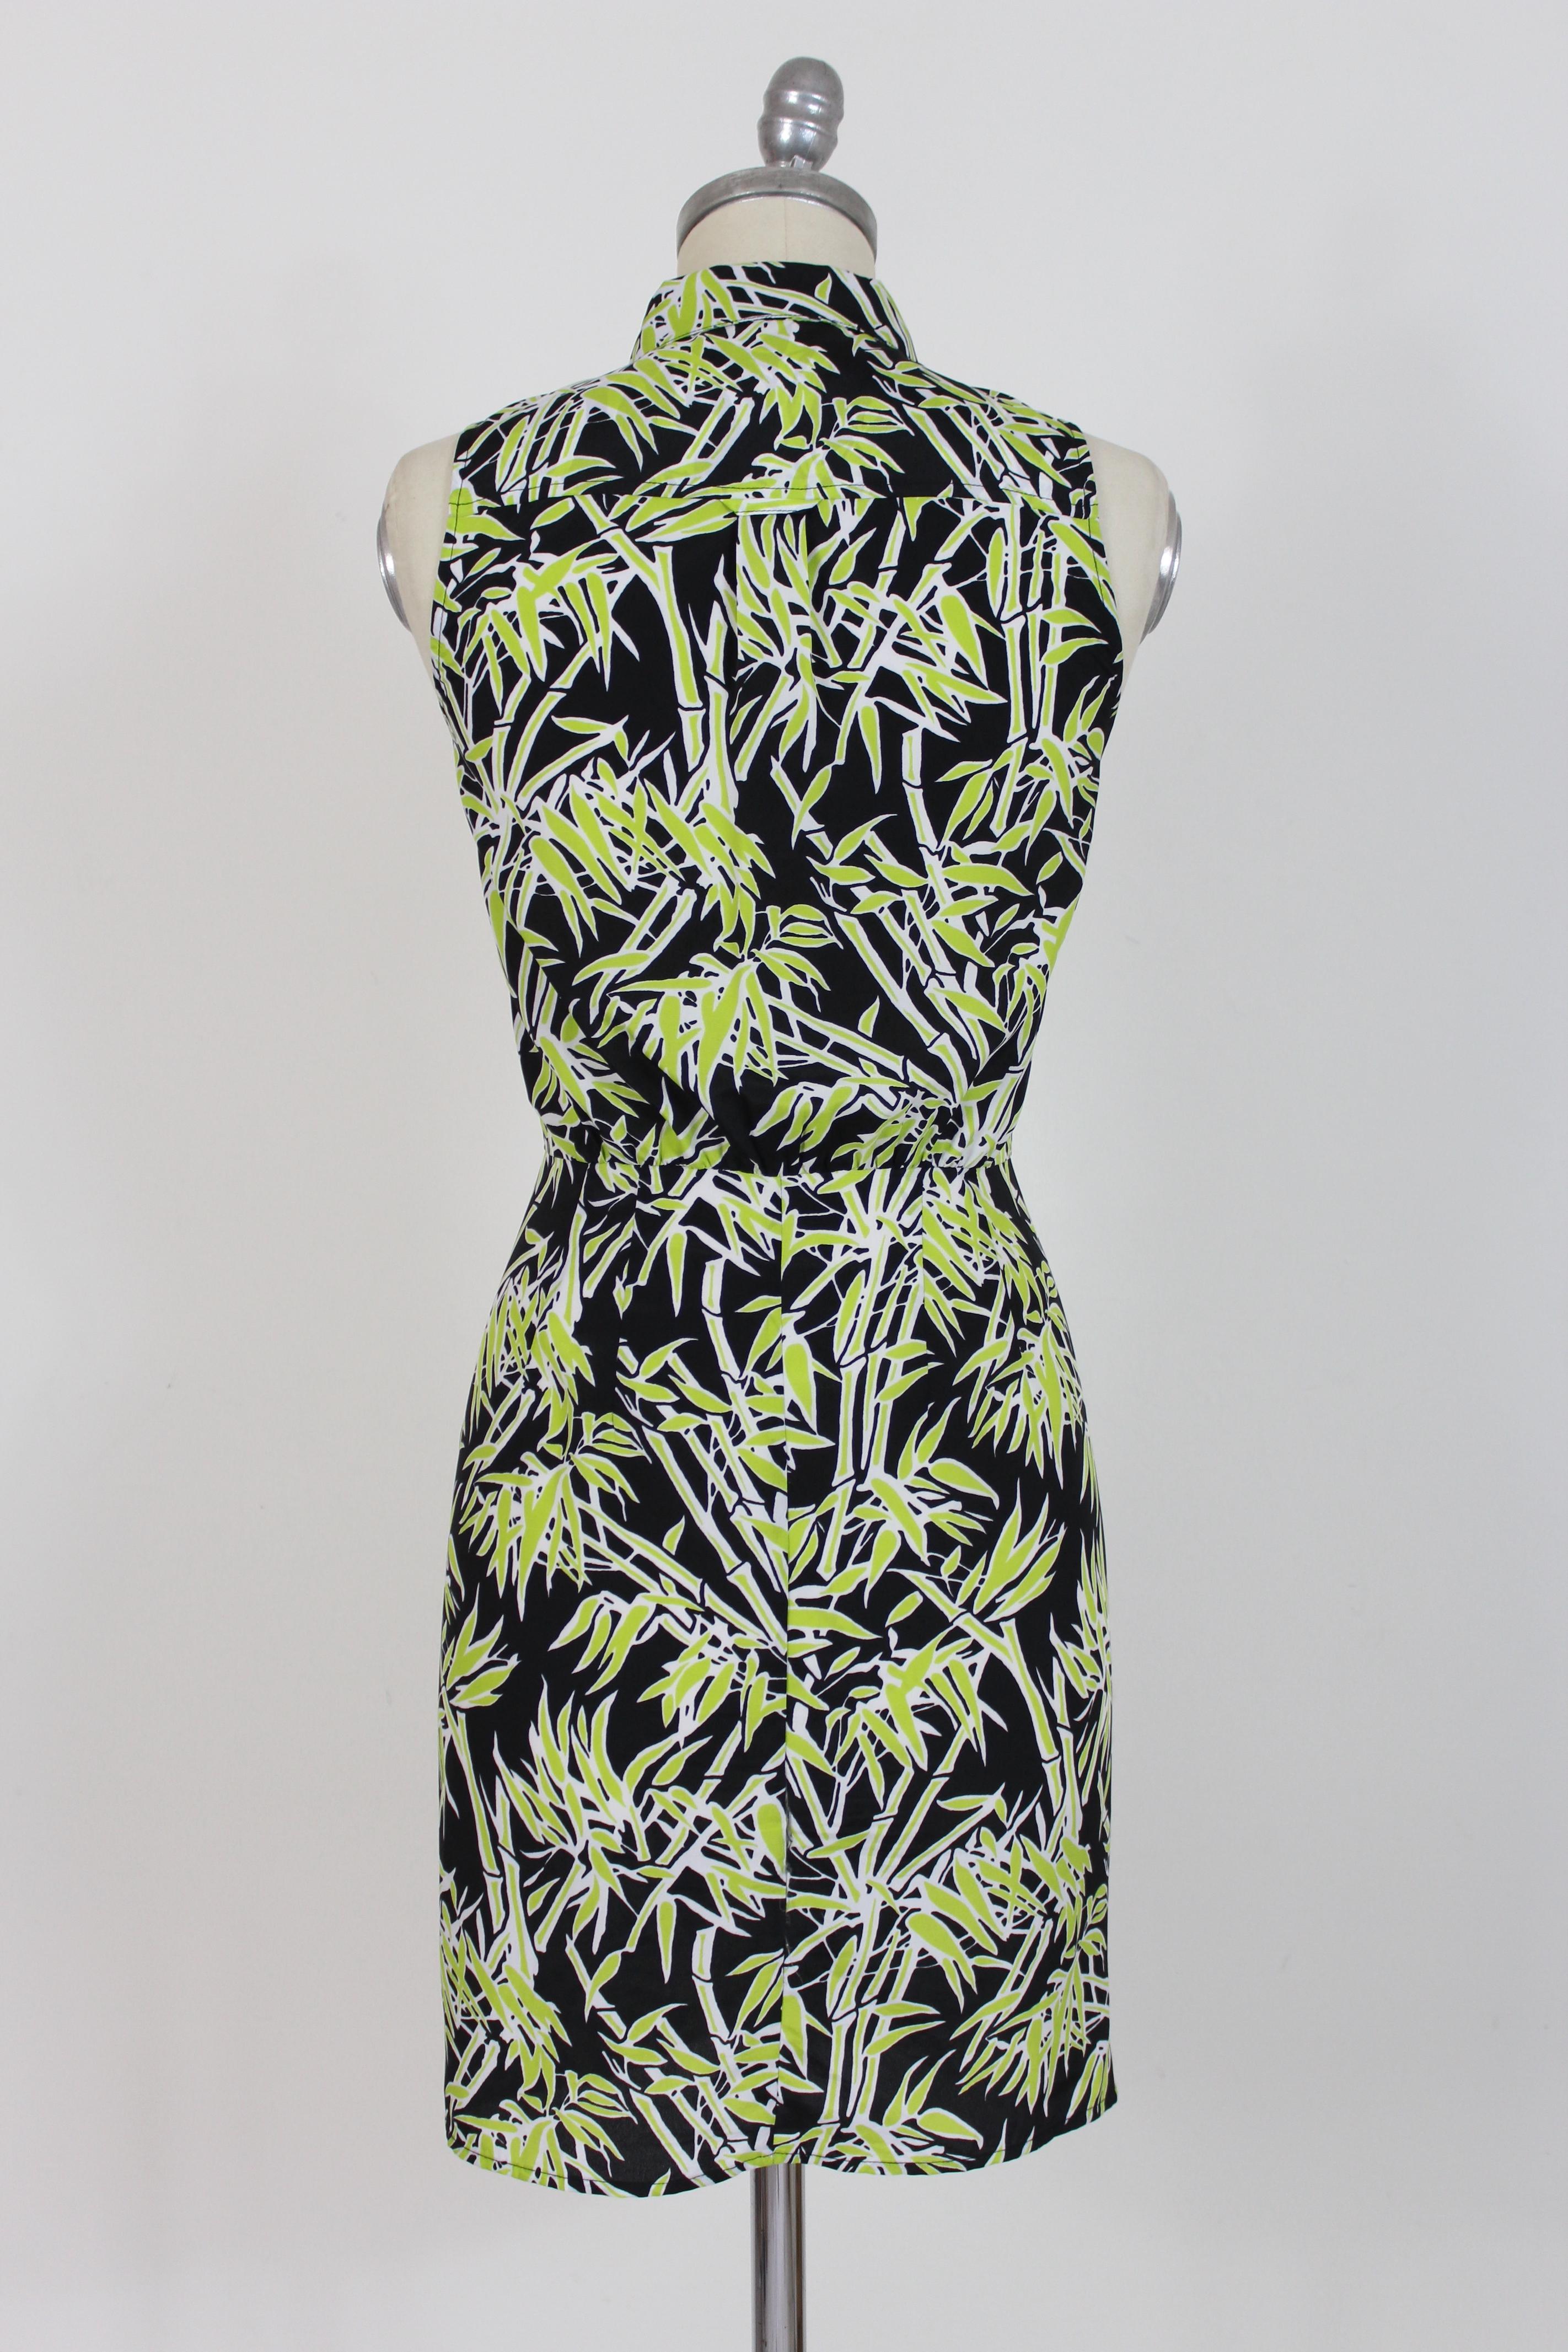 Michael Kors 2000s women's dress. Short dress, shirt model, closure with buttons on the length and bow at the waist. Green and black color with flower pattern. 100% polyester fabric.

Condition: Excellent

Item used few times, it remains in its